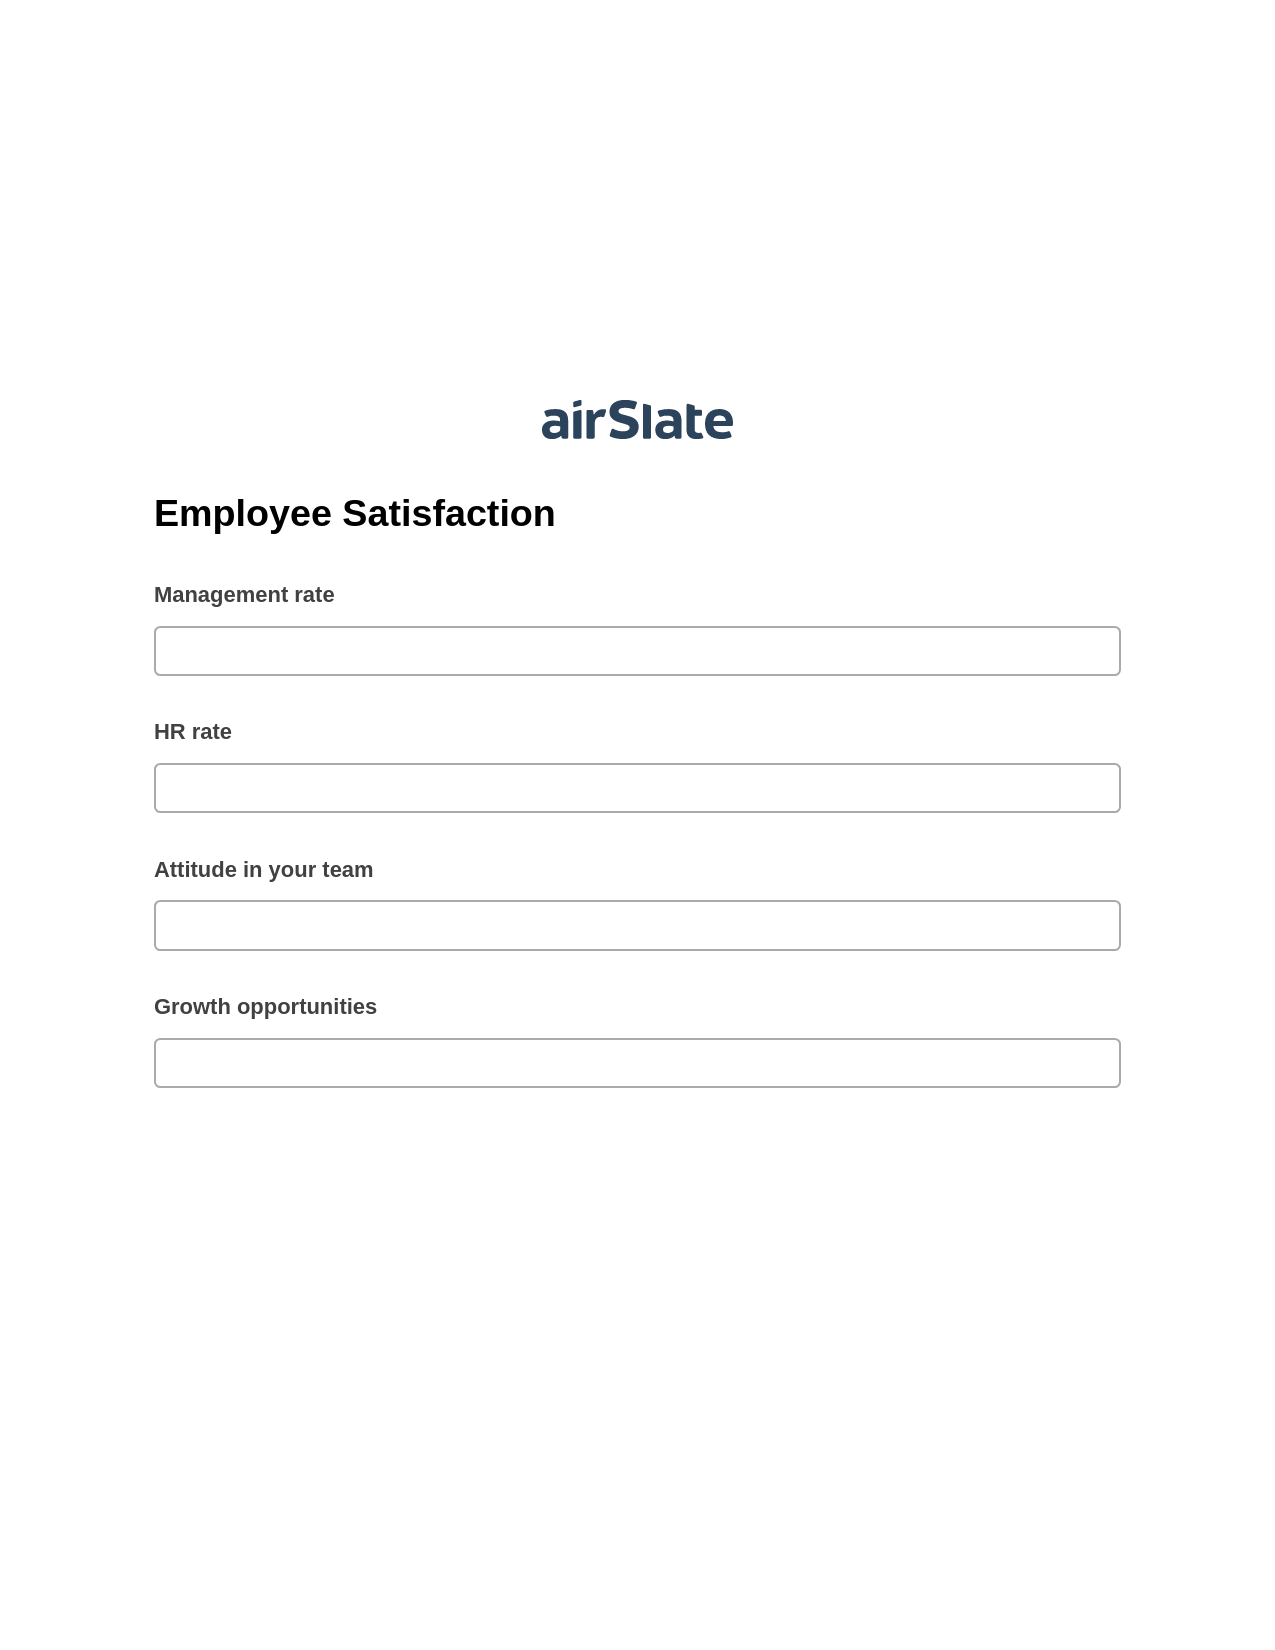 Employee Satisfaction Pre-fill from Salesforce Records with SOQL Bot, Google Cloud Print Bot, Export to Excel 365 Bot